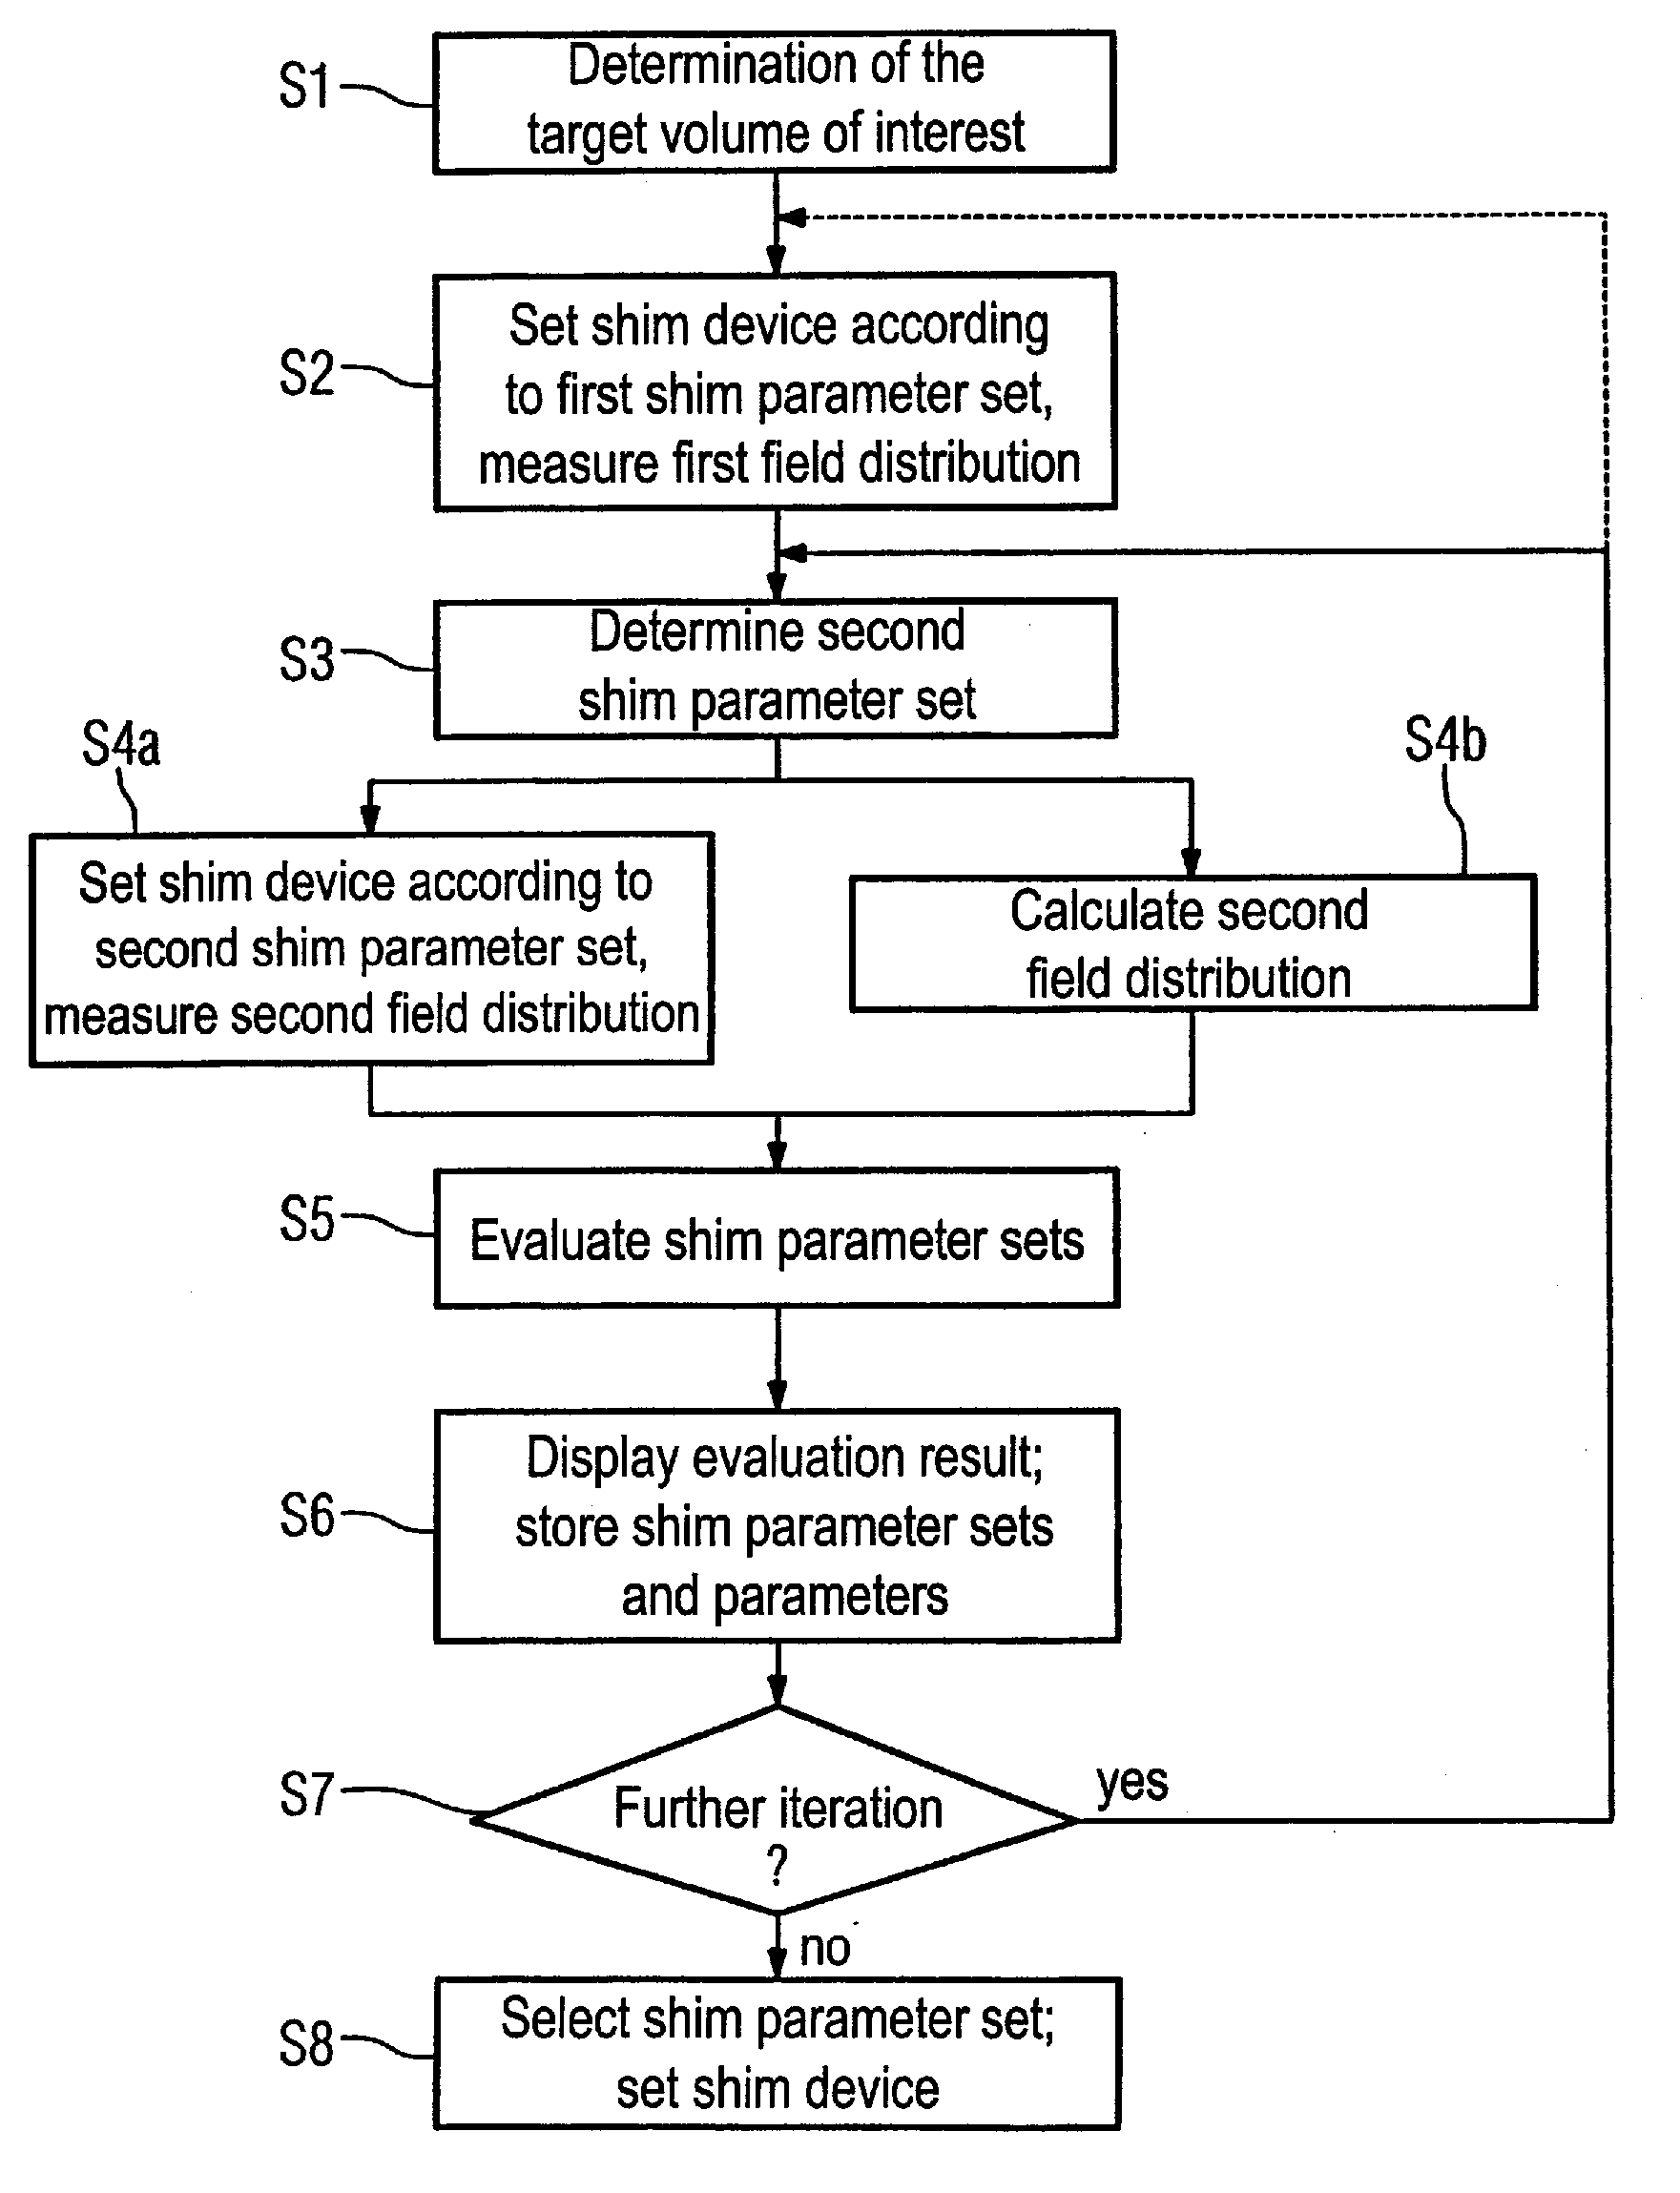 Method for determination and evaluation of a shim parameter set for controlling a shim device in a magnetic resonance apparatus